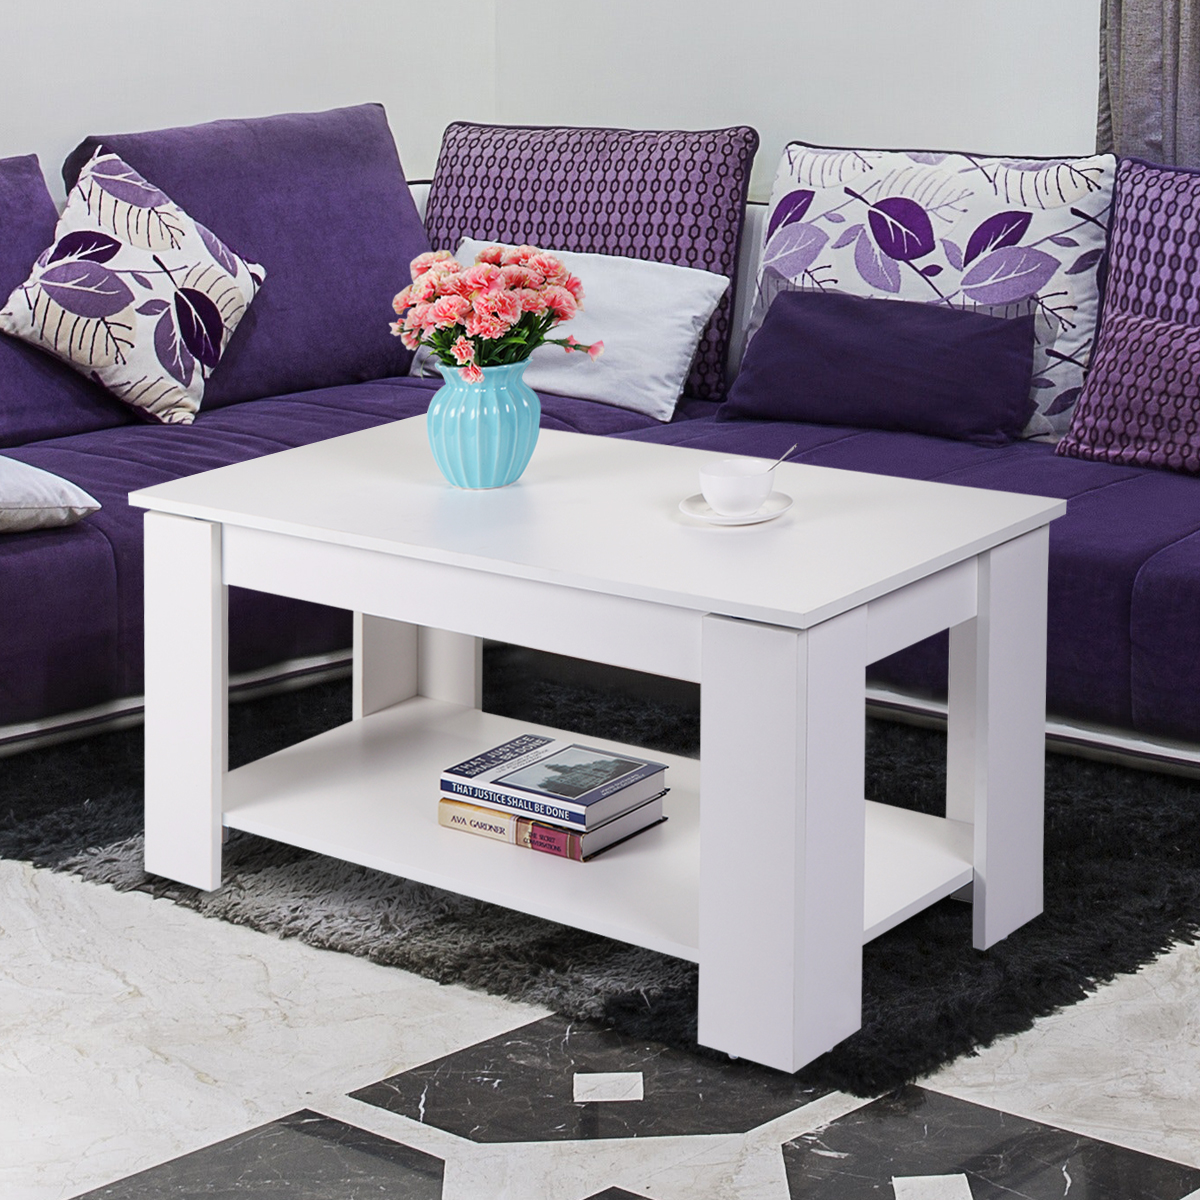 Lift Top Coffee Table with Hidden Compartment and Open Shelf, Modern Wooden Table for Home Living Room, White-Boyel Living